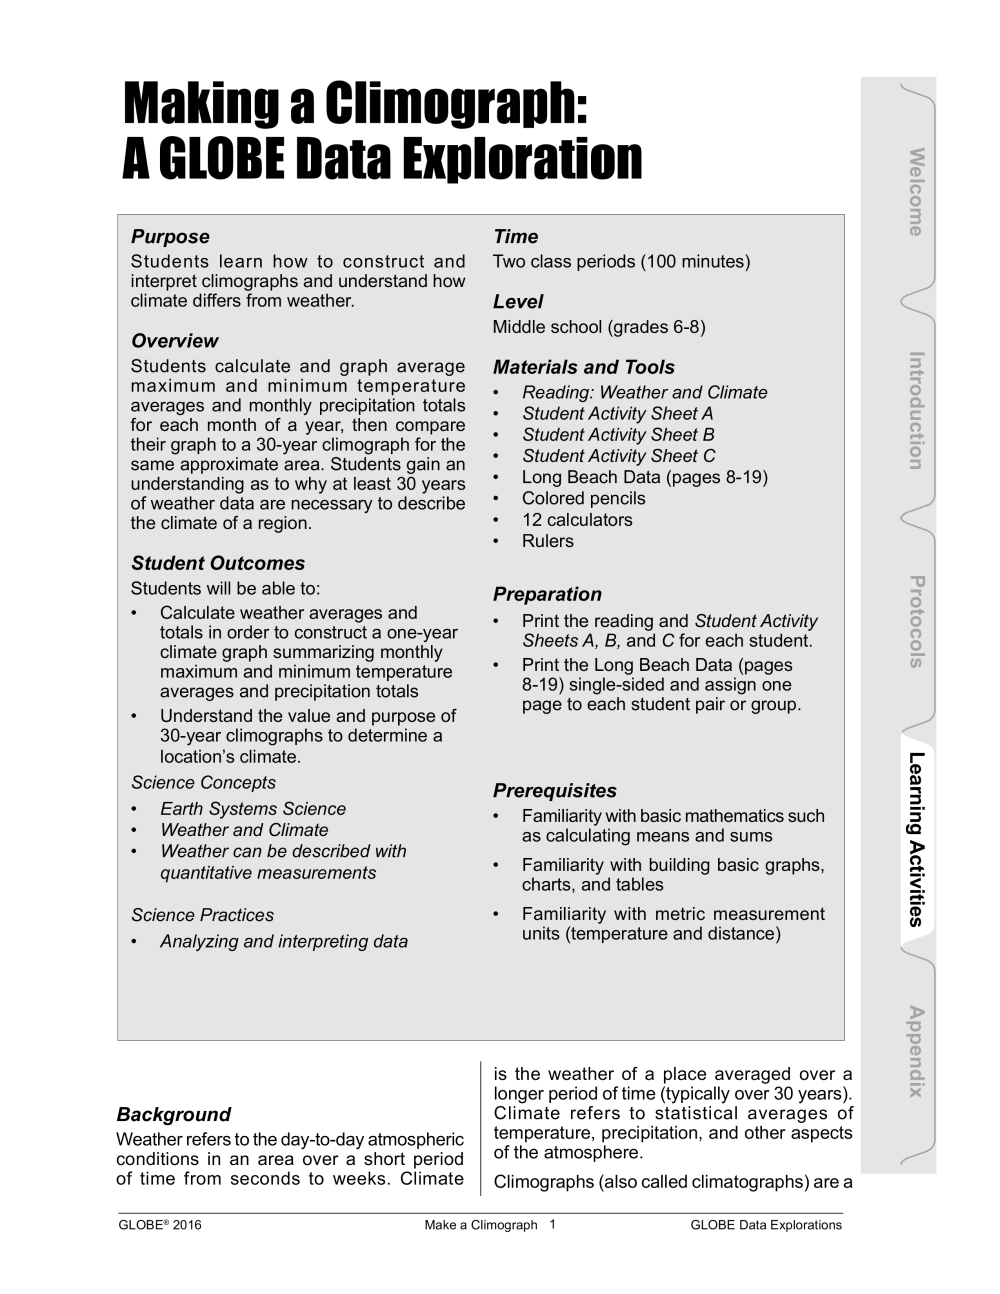 Learning Activities preview for Making a Climograph- A GLOBE Data Exploration